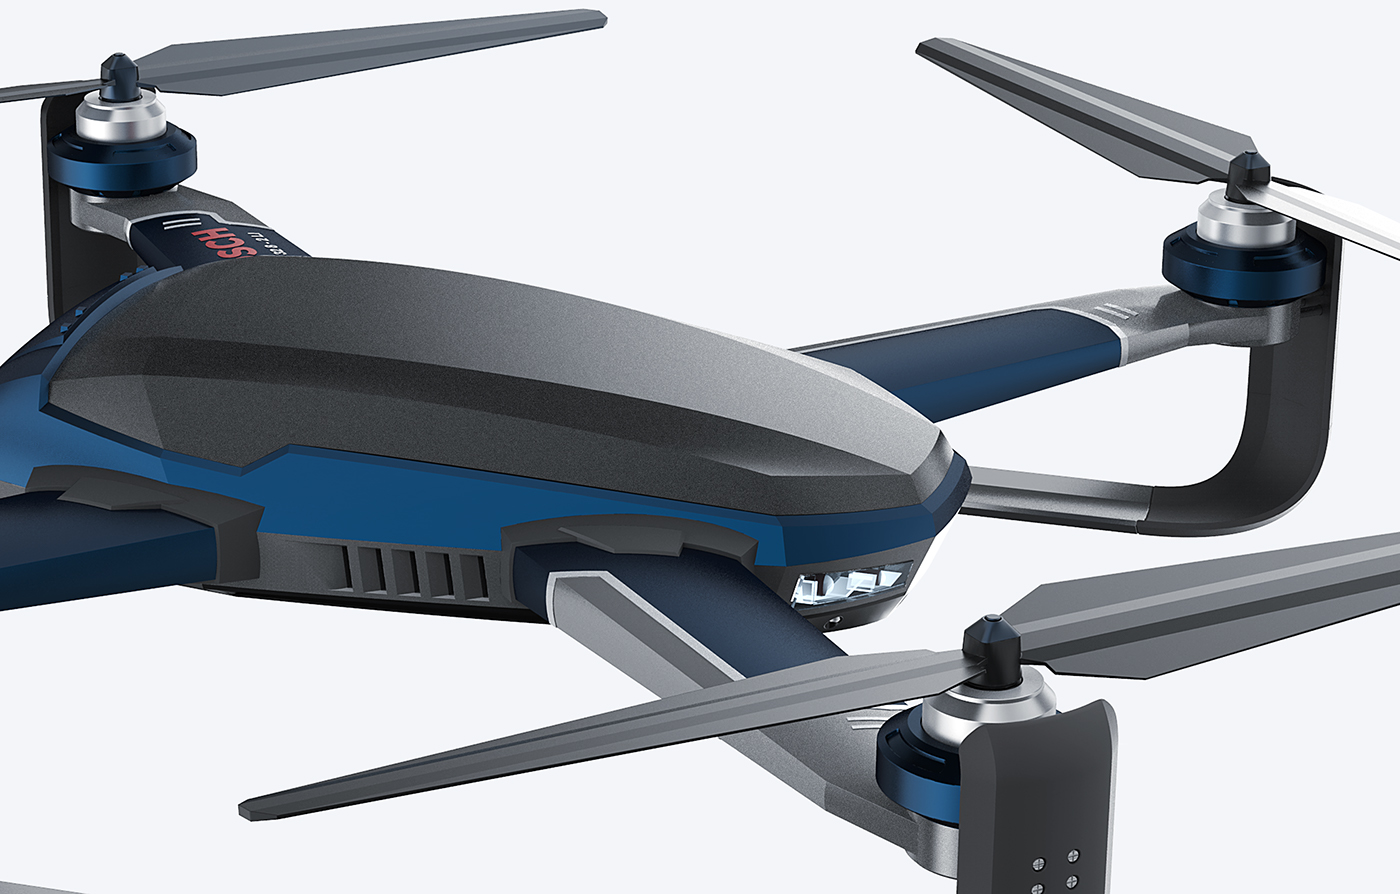 Bosch emergency drone product industrial concept design